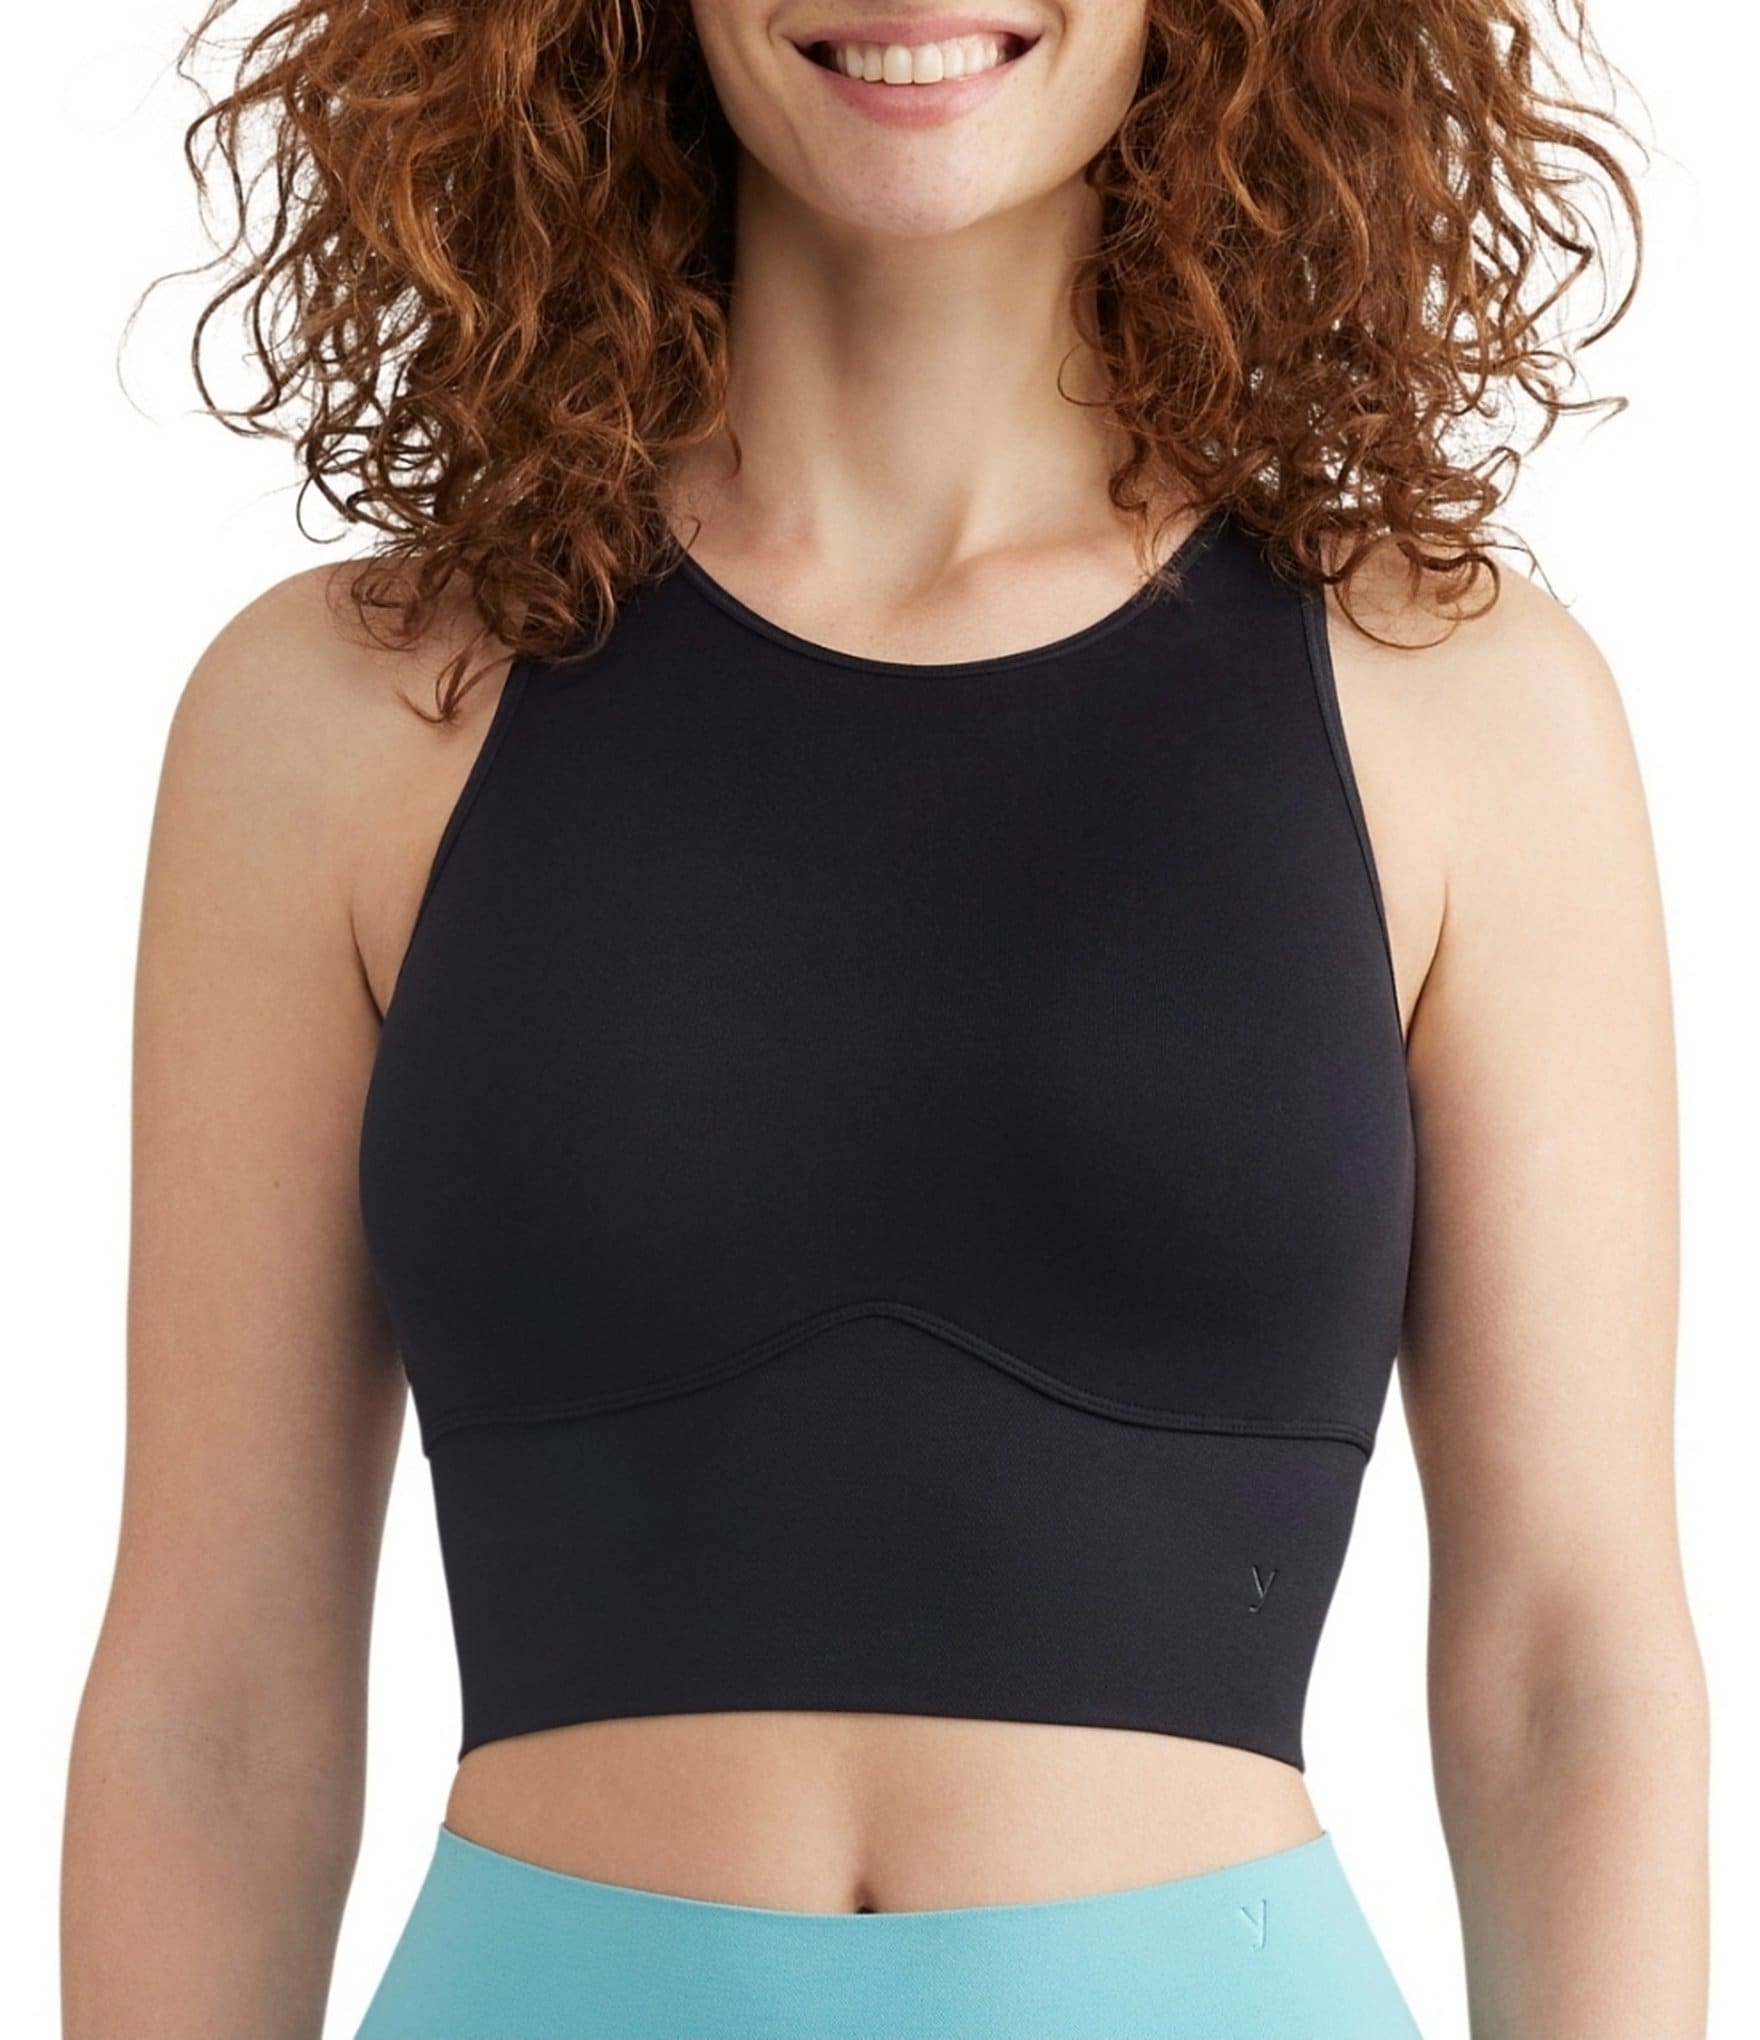 Yummie Mallory Comfortably Fit Seamless Racerback Bralette & Reviews